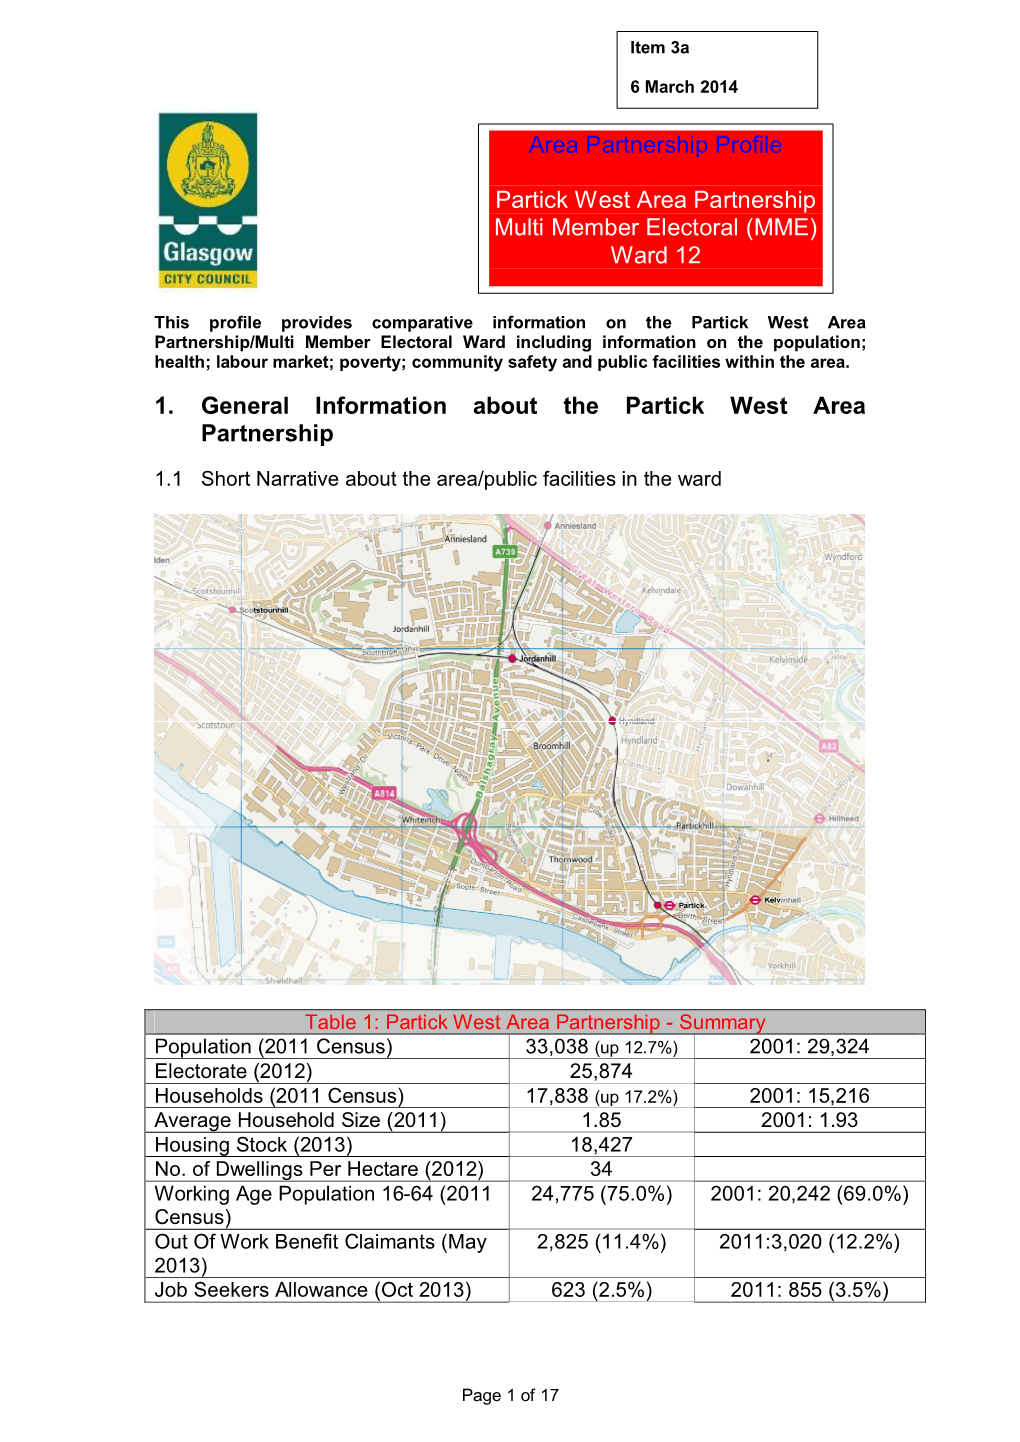 1. General Information About the Partick West Area Partnership Area